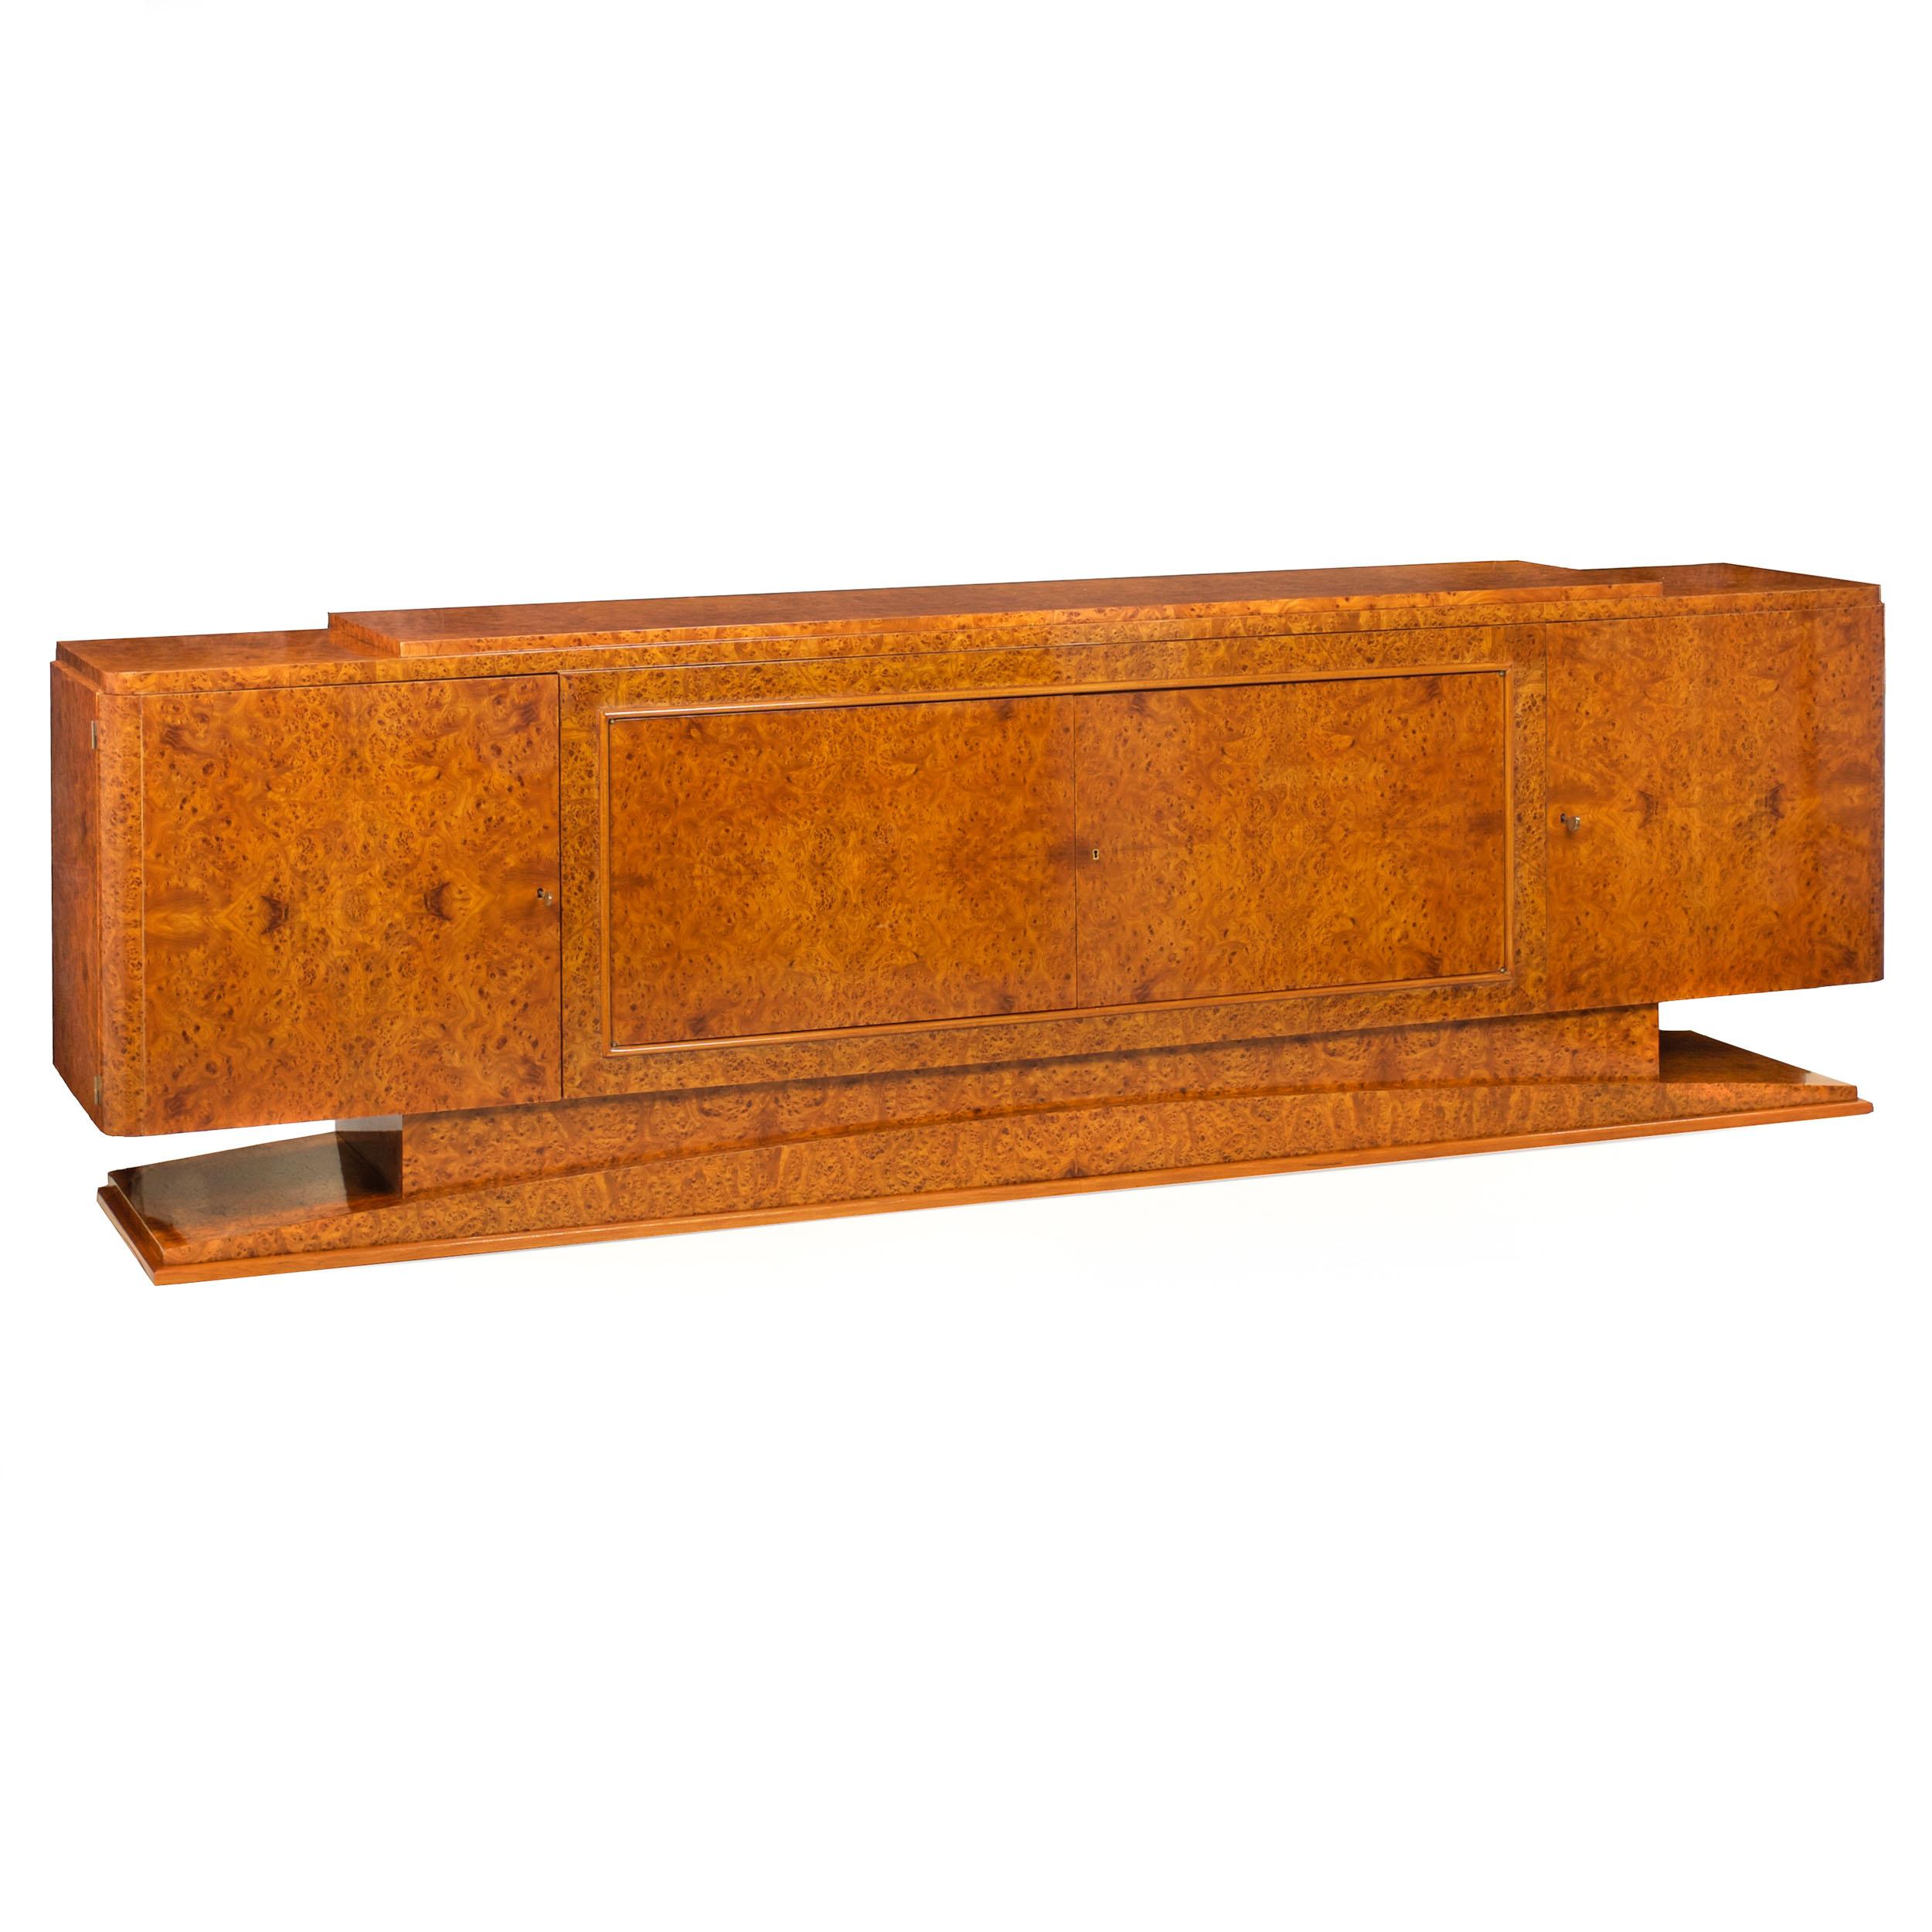 MONUMENTAL ART DECO BURL OLIVEWOOD CREDENZA CABINET
France  circa 1930s
Item # 111LTW03P

An innovative creation from the Art Deco period circa the 1930s, the cabinet was ingeniously designed to break down into manageable parts for ease of transit: